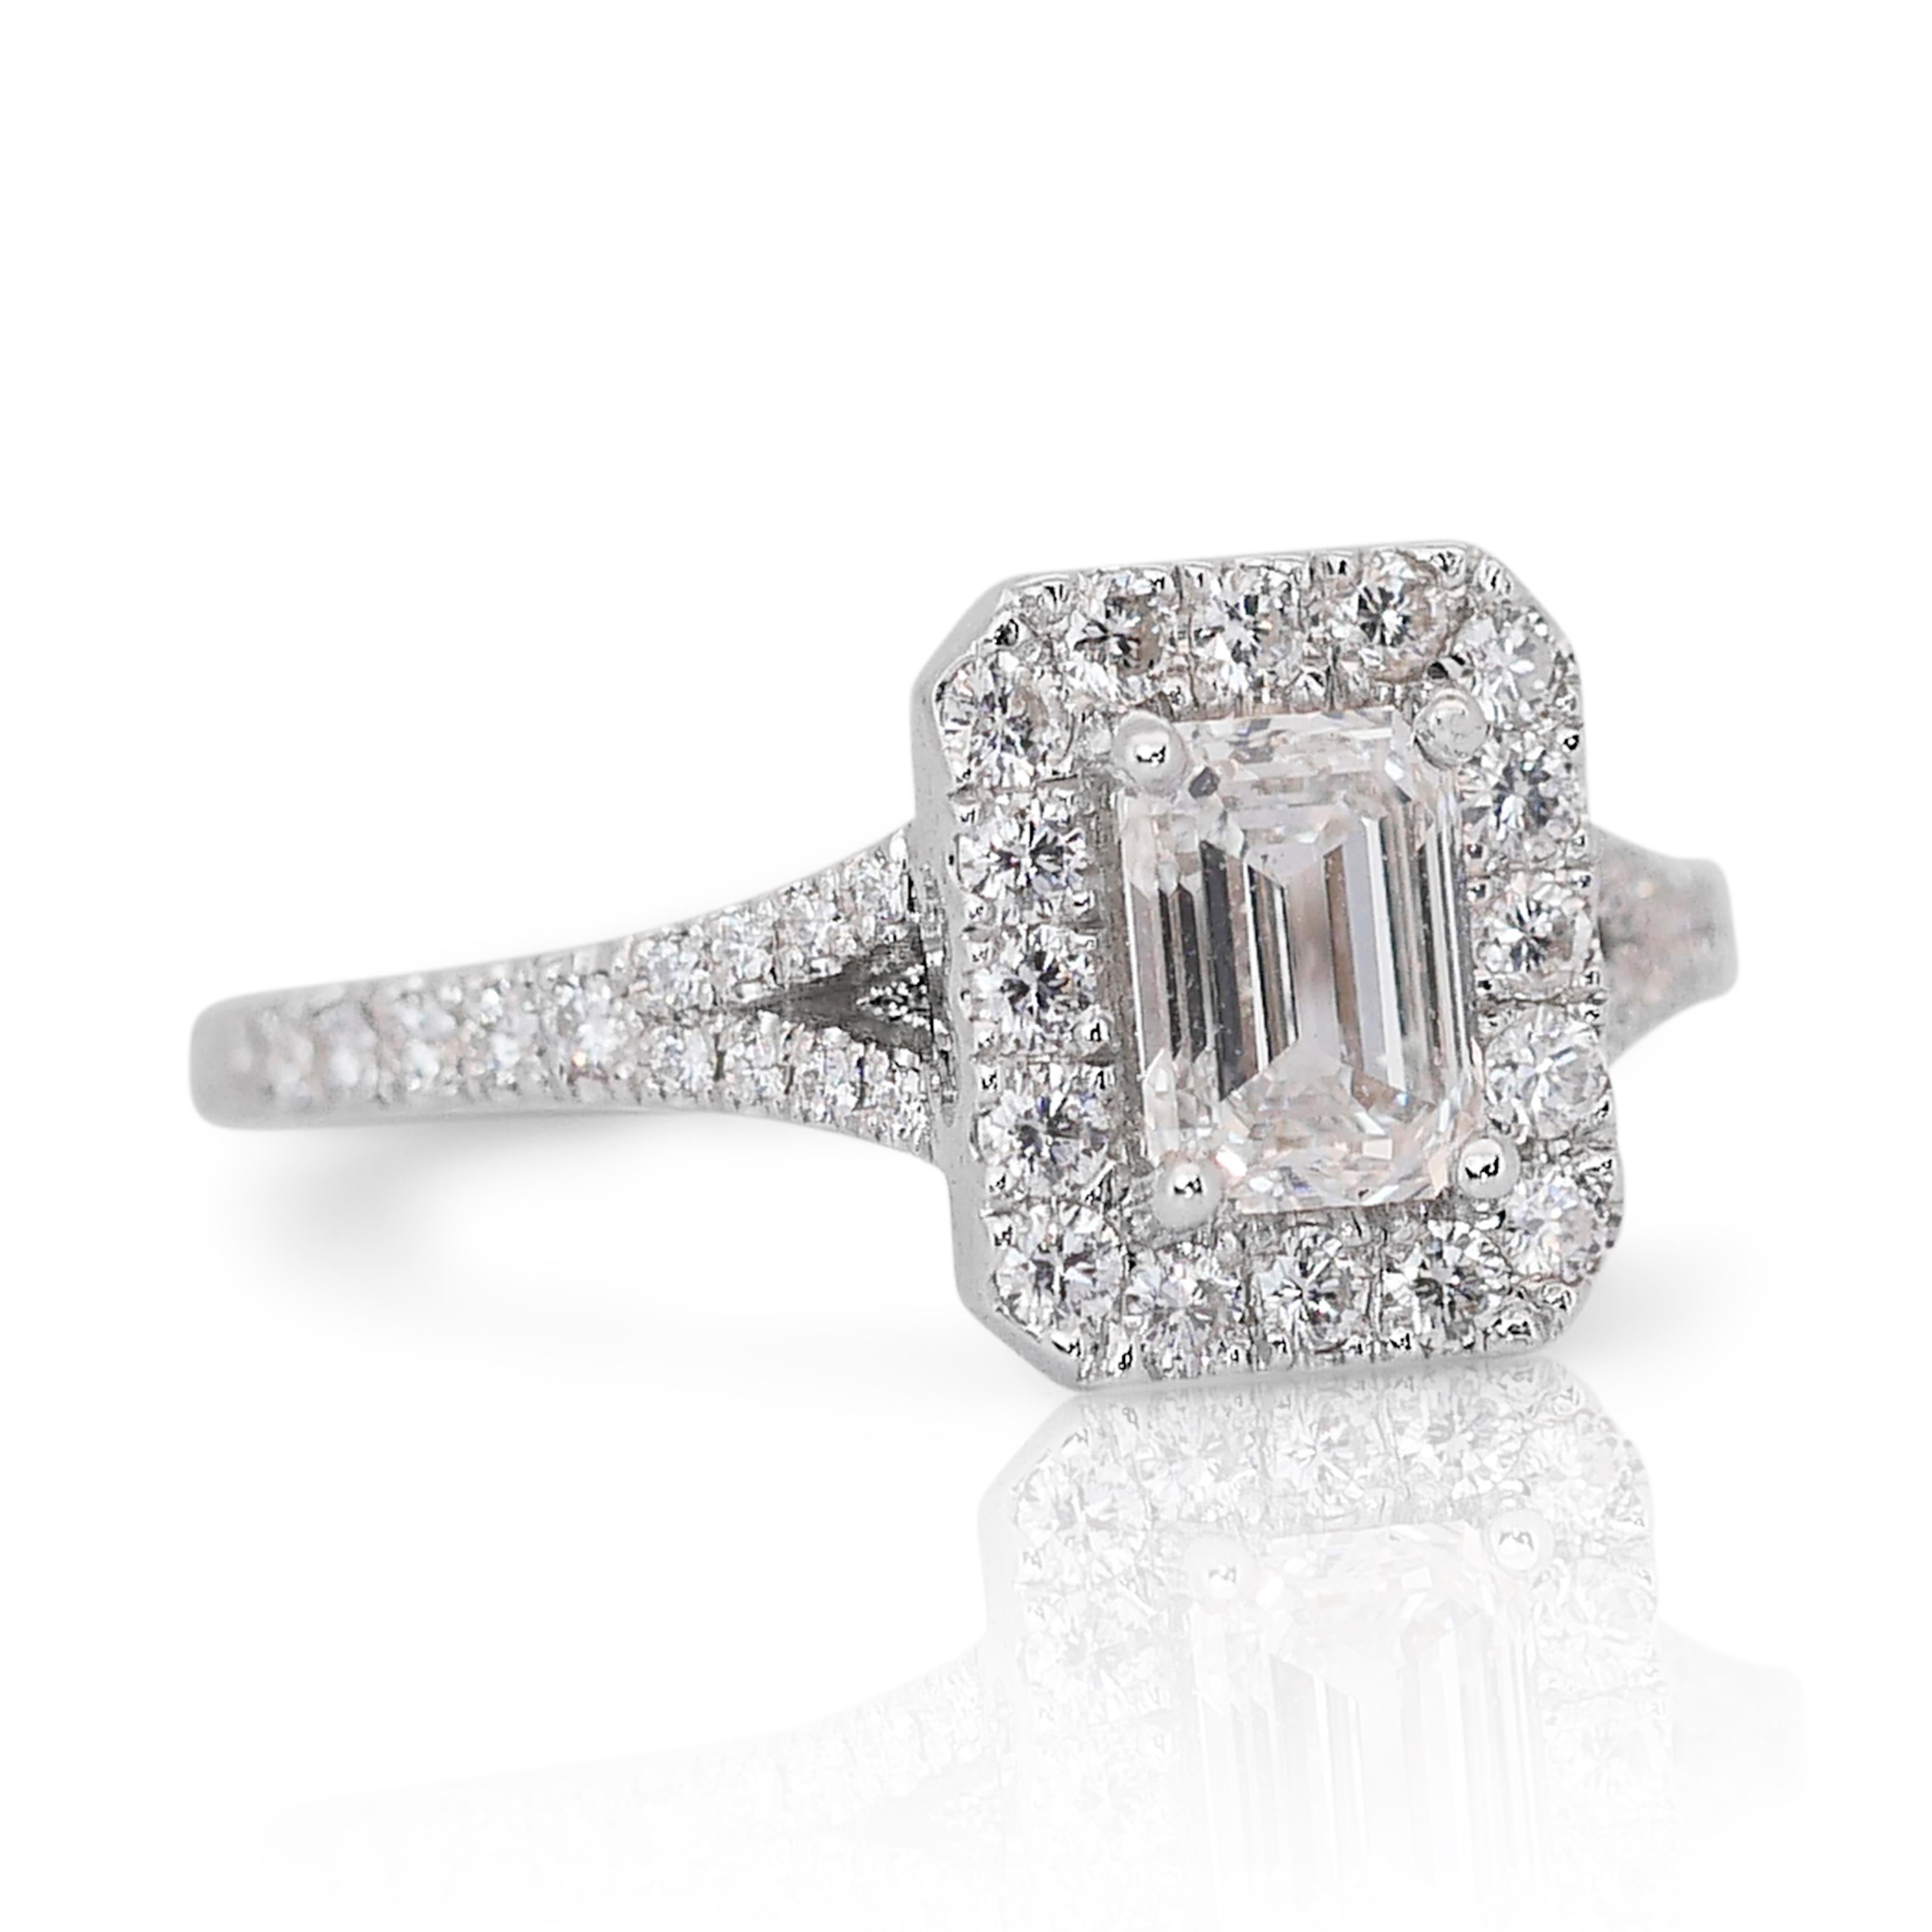 Captivating 1.15ct Emerald-Cut Diamond Halo Ring in 18k White Gold - GIA Certified 

This exquisite diamond halo ring in 18k white gold is a perfect blend of modern elegance and timeless design. It features a central emerald-cut diamond weighing